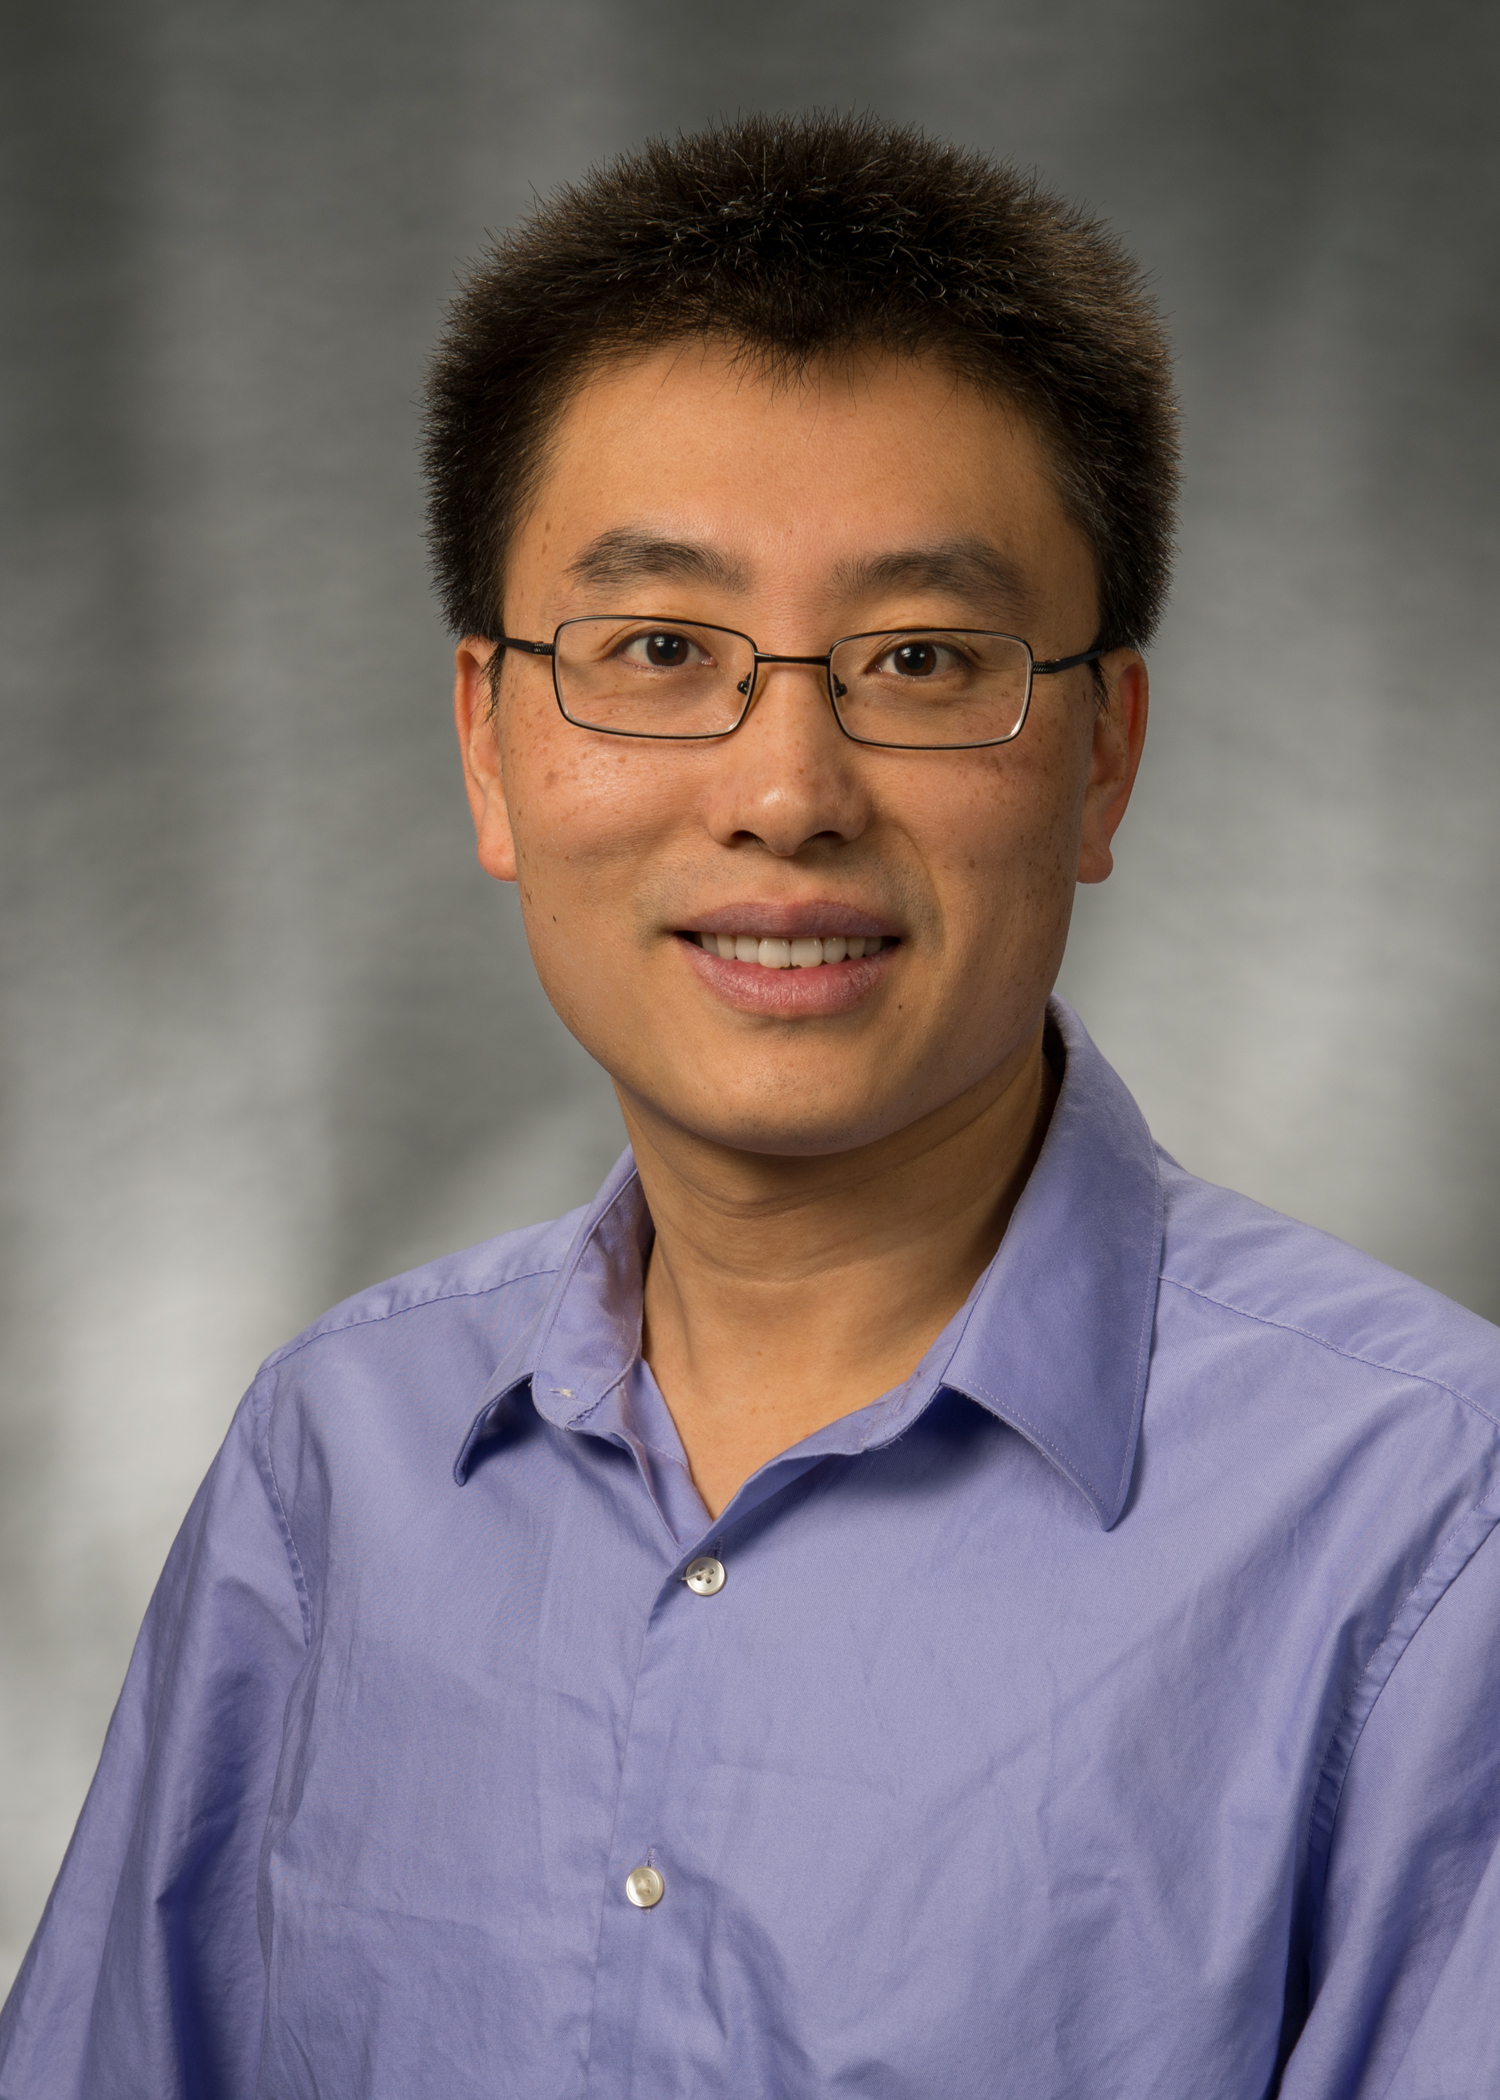 A headshot of Jianhui Wang, a member of the Lyle School of Engineering Faculty.